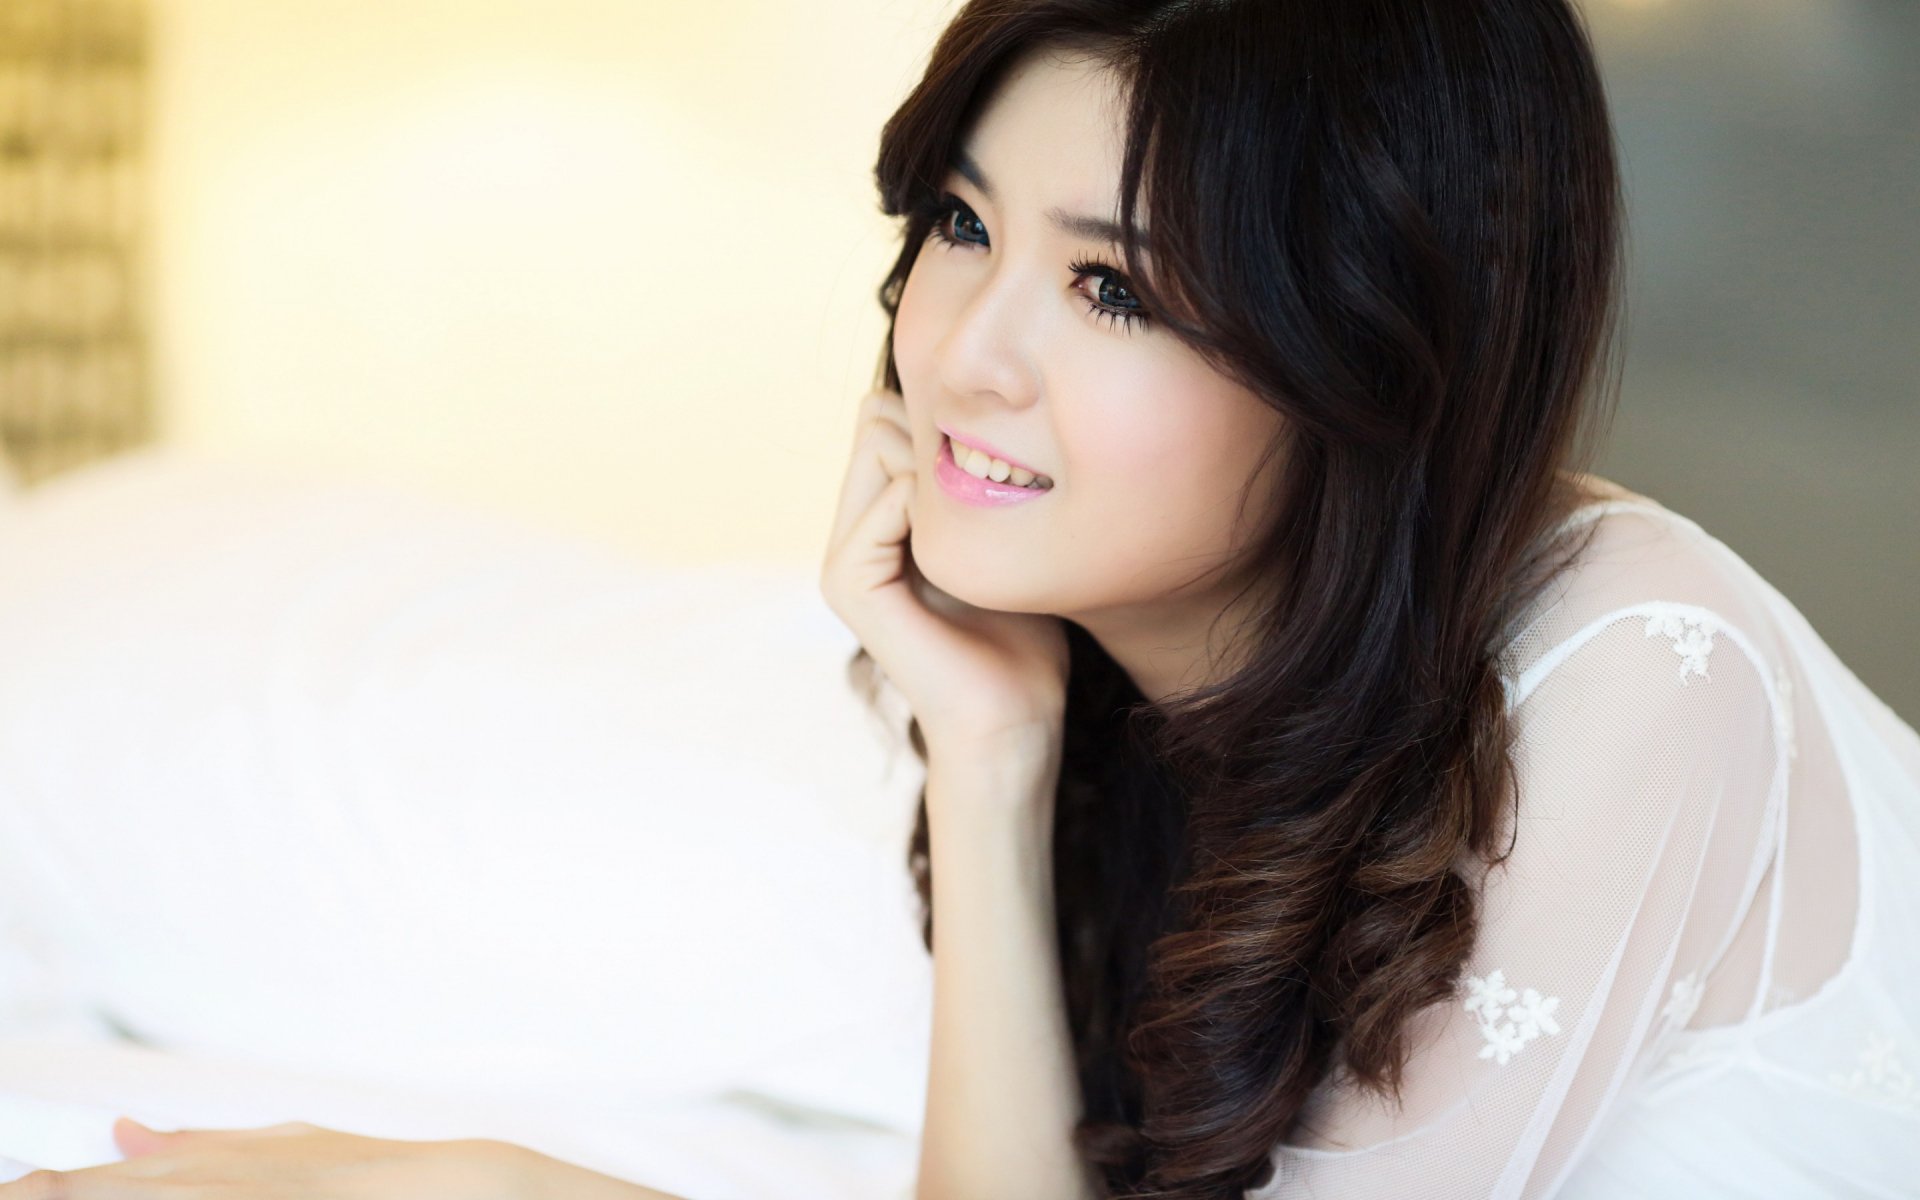 HD desktop wallpaper featuring a woman in white attire, smiling while resting her chin on her hand, in a softly lit setting.